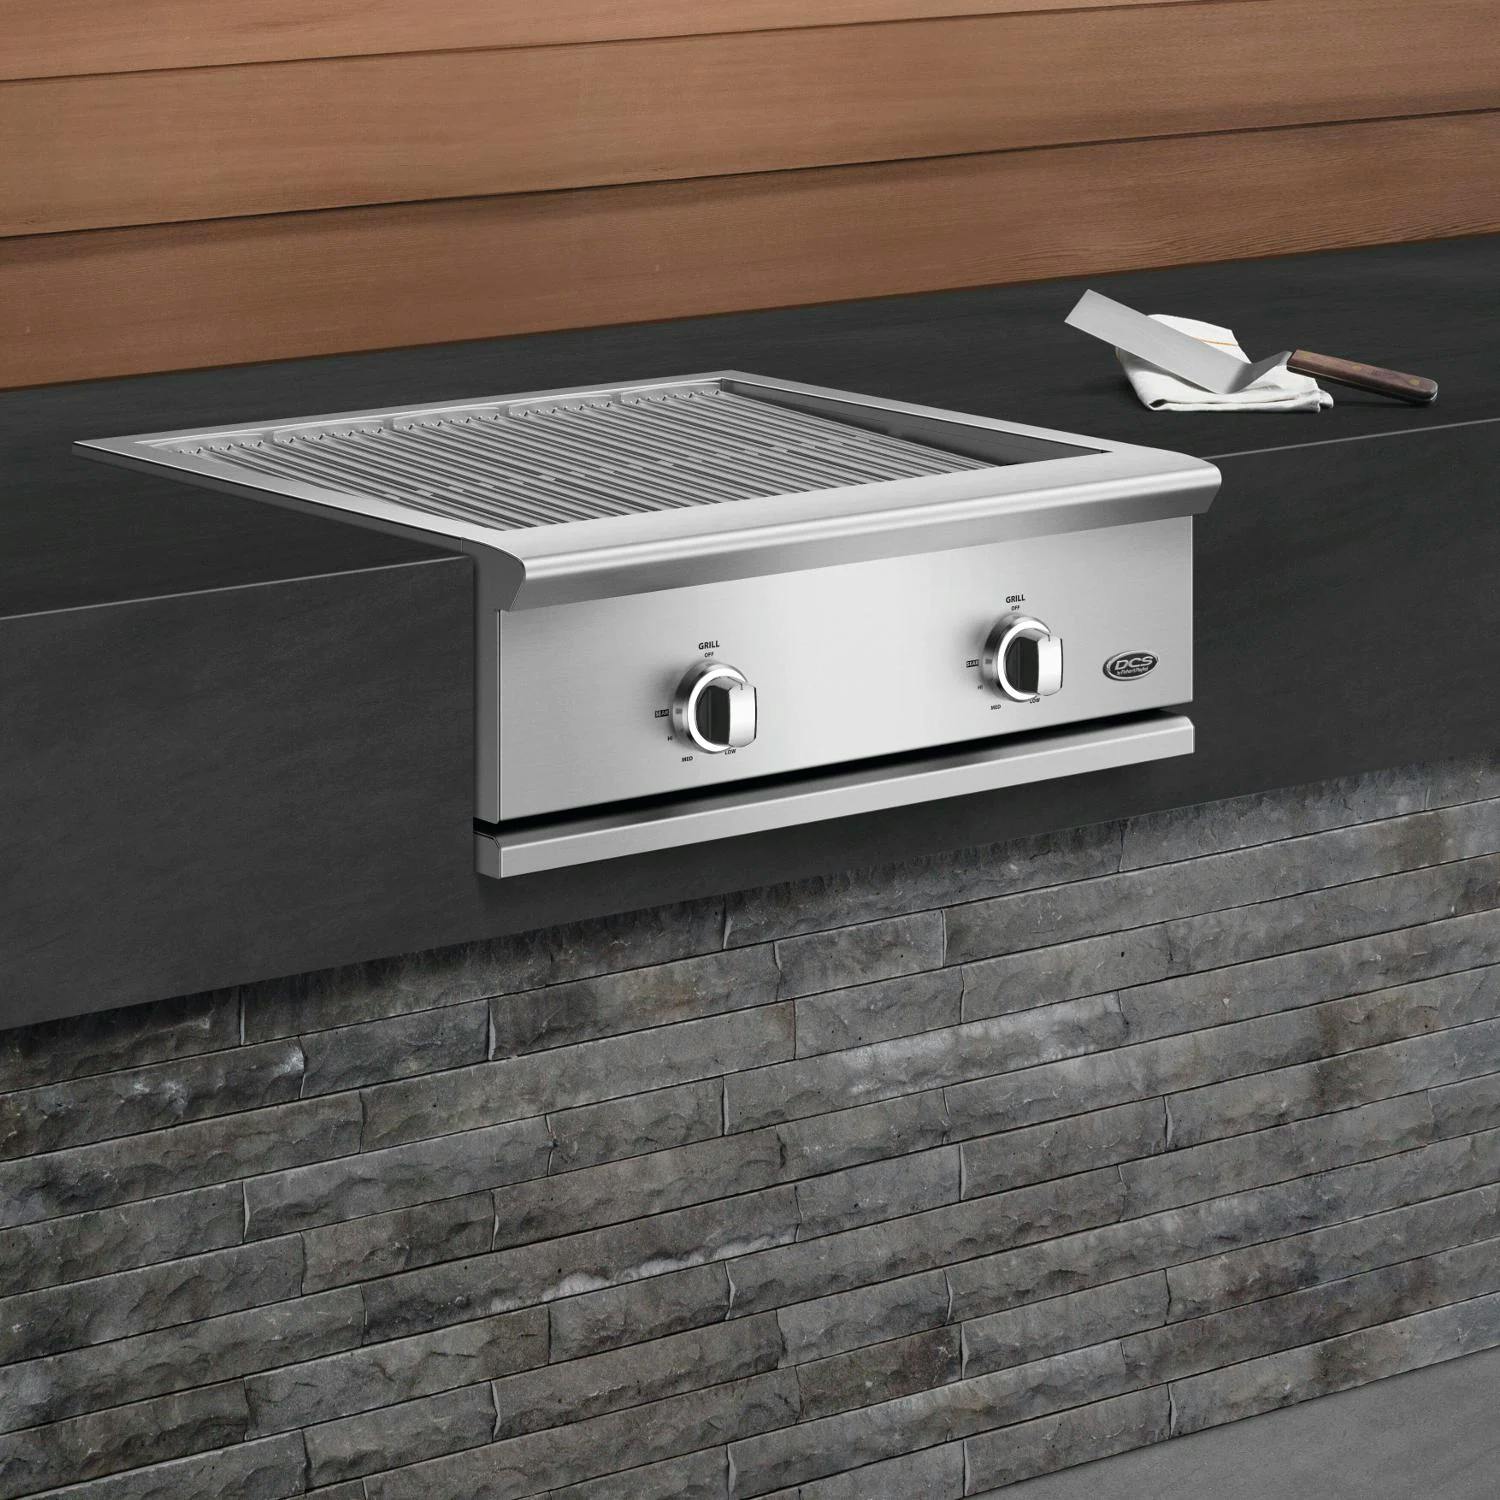 DCS Series 9 Built-in Gas Grill